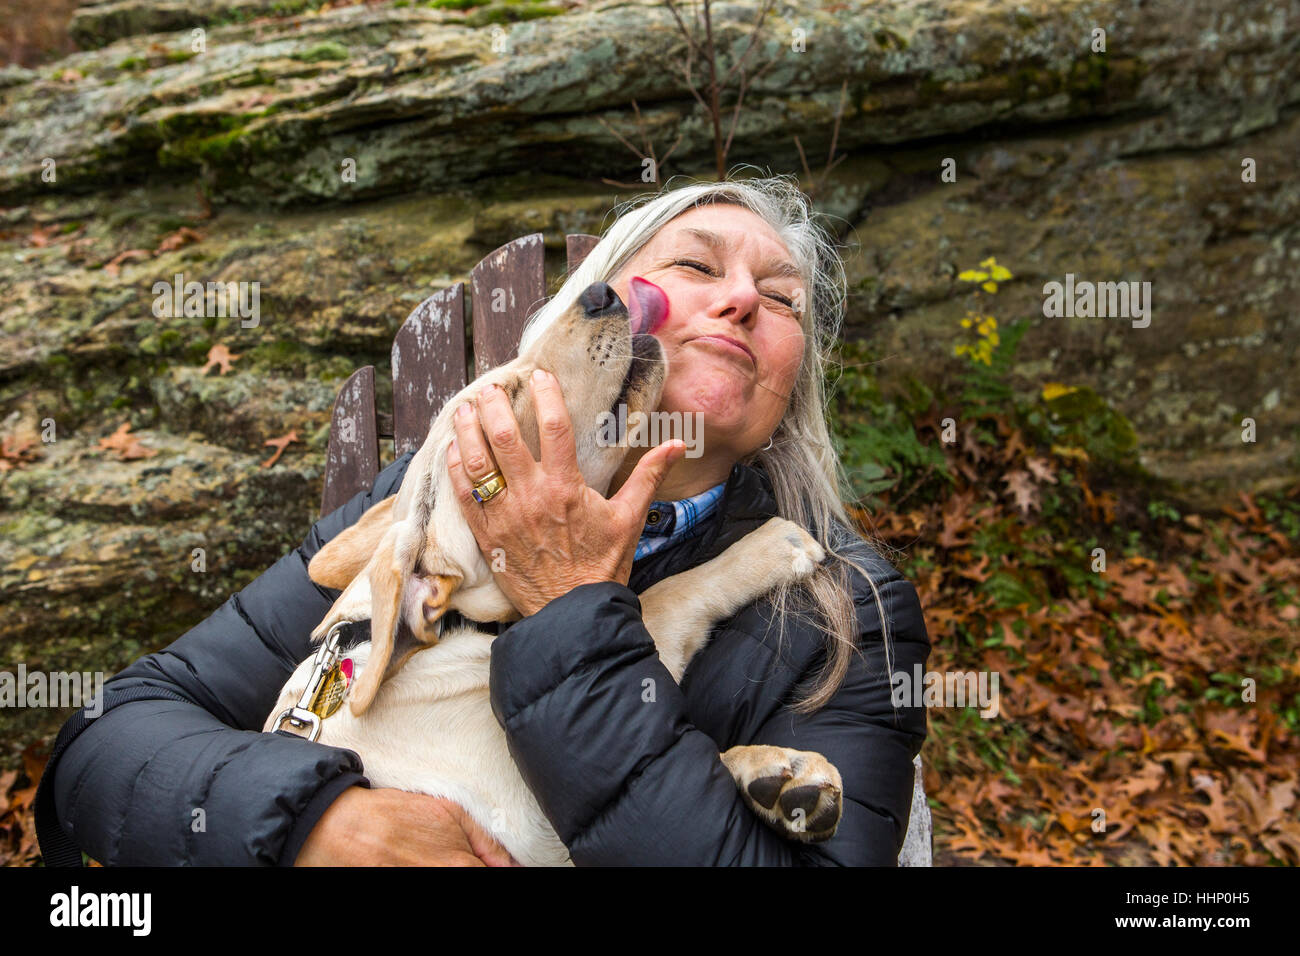 Dog licking face of Caucasian woman outdoors Stock Photo